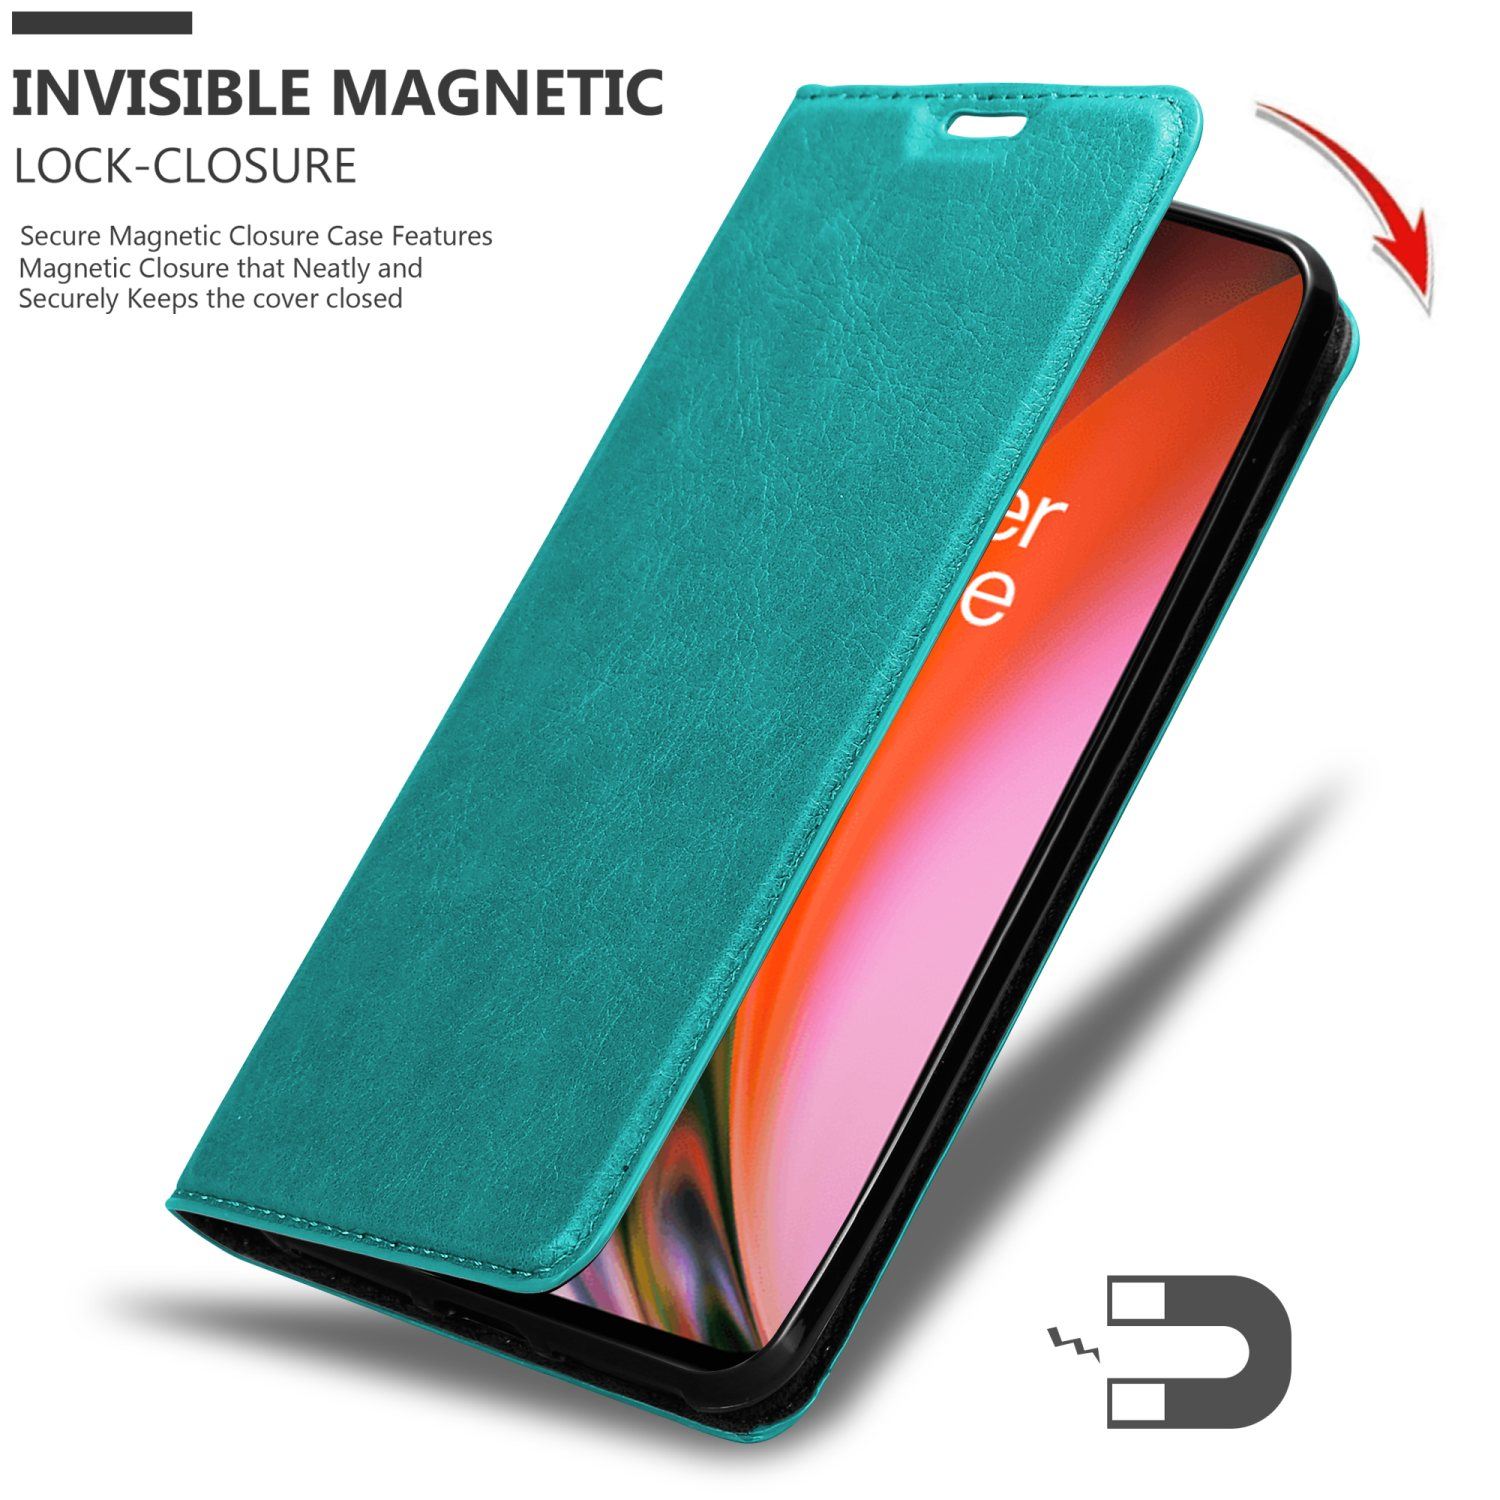 Hülle Magnet, Bookcover, 2 Nord OnePlus, Invisible Book 5G, PETROL TÜRKIS CADORABO